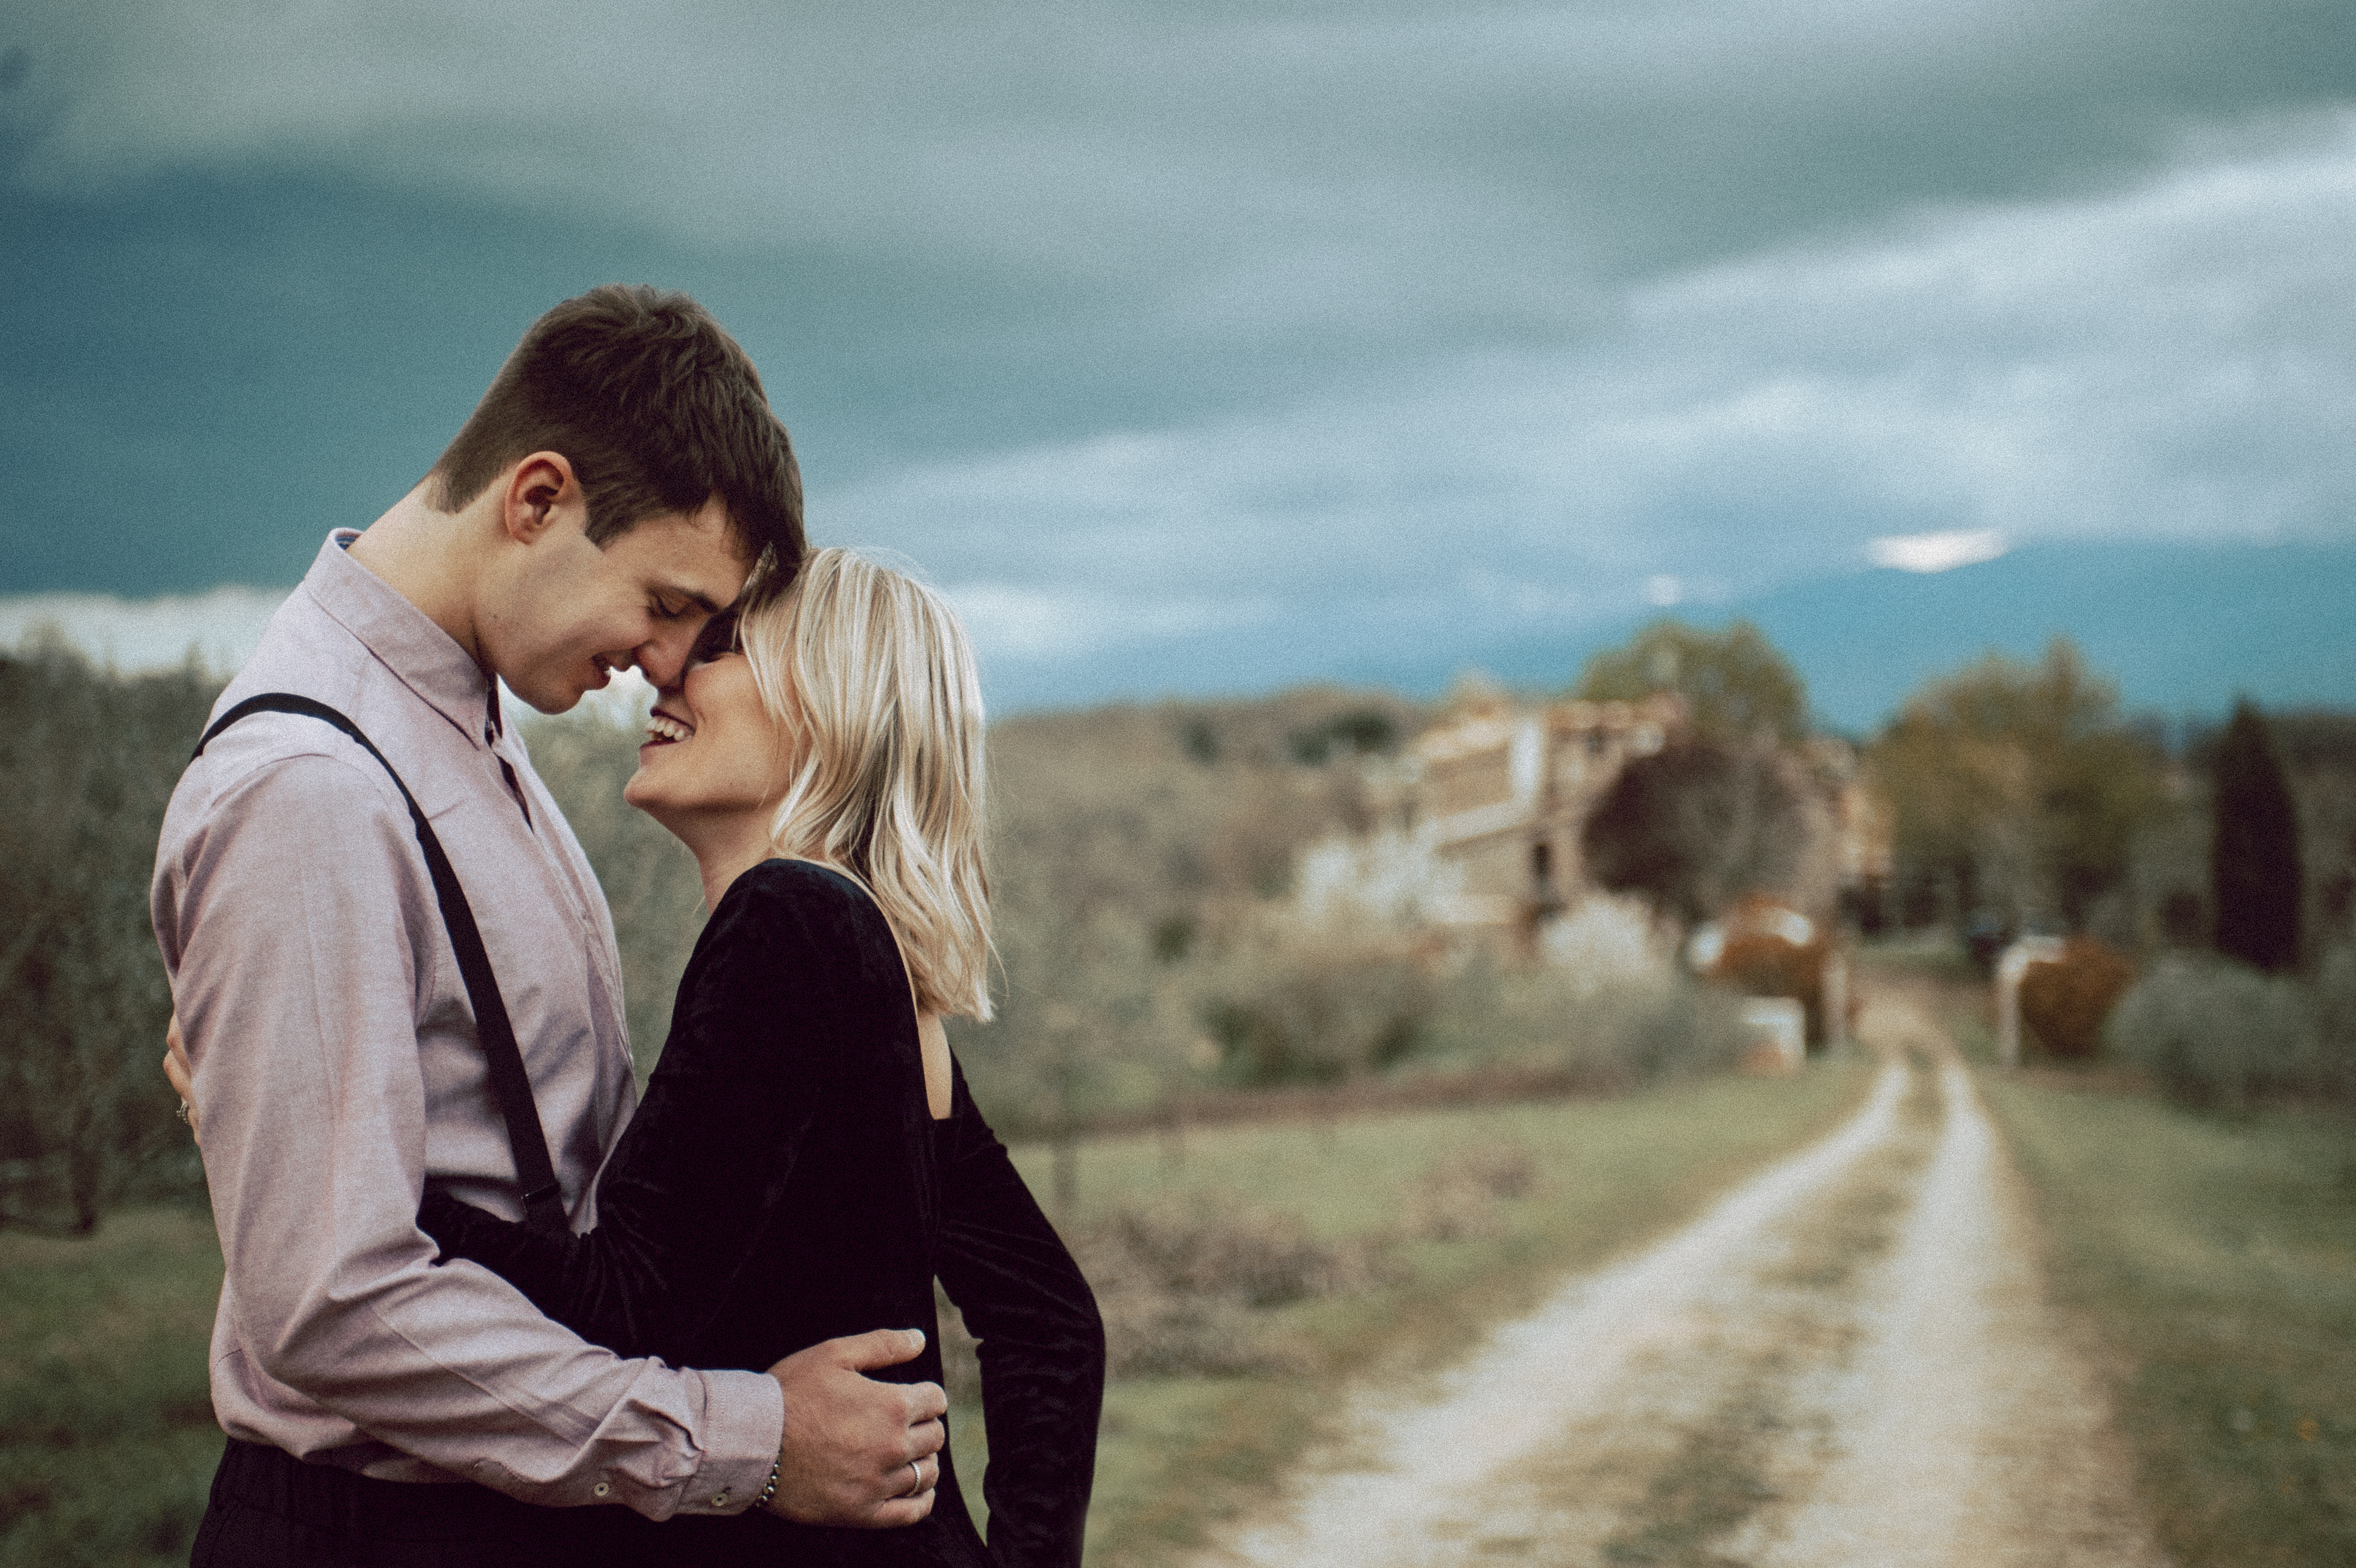 Tuscany Engagement Session - Couple hugging with Tuscany countryside in the background